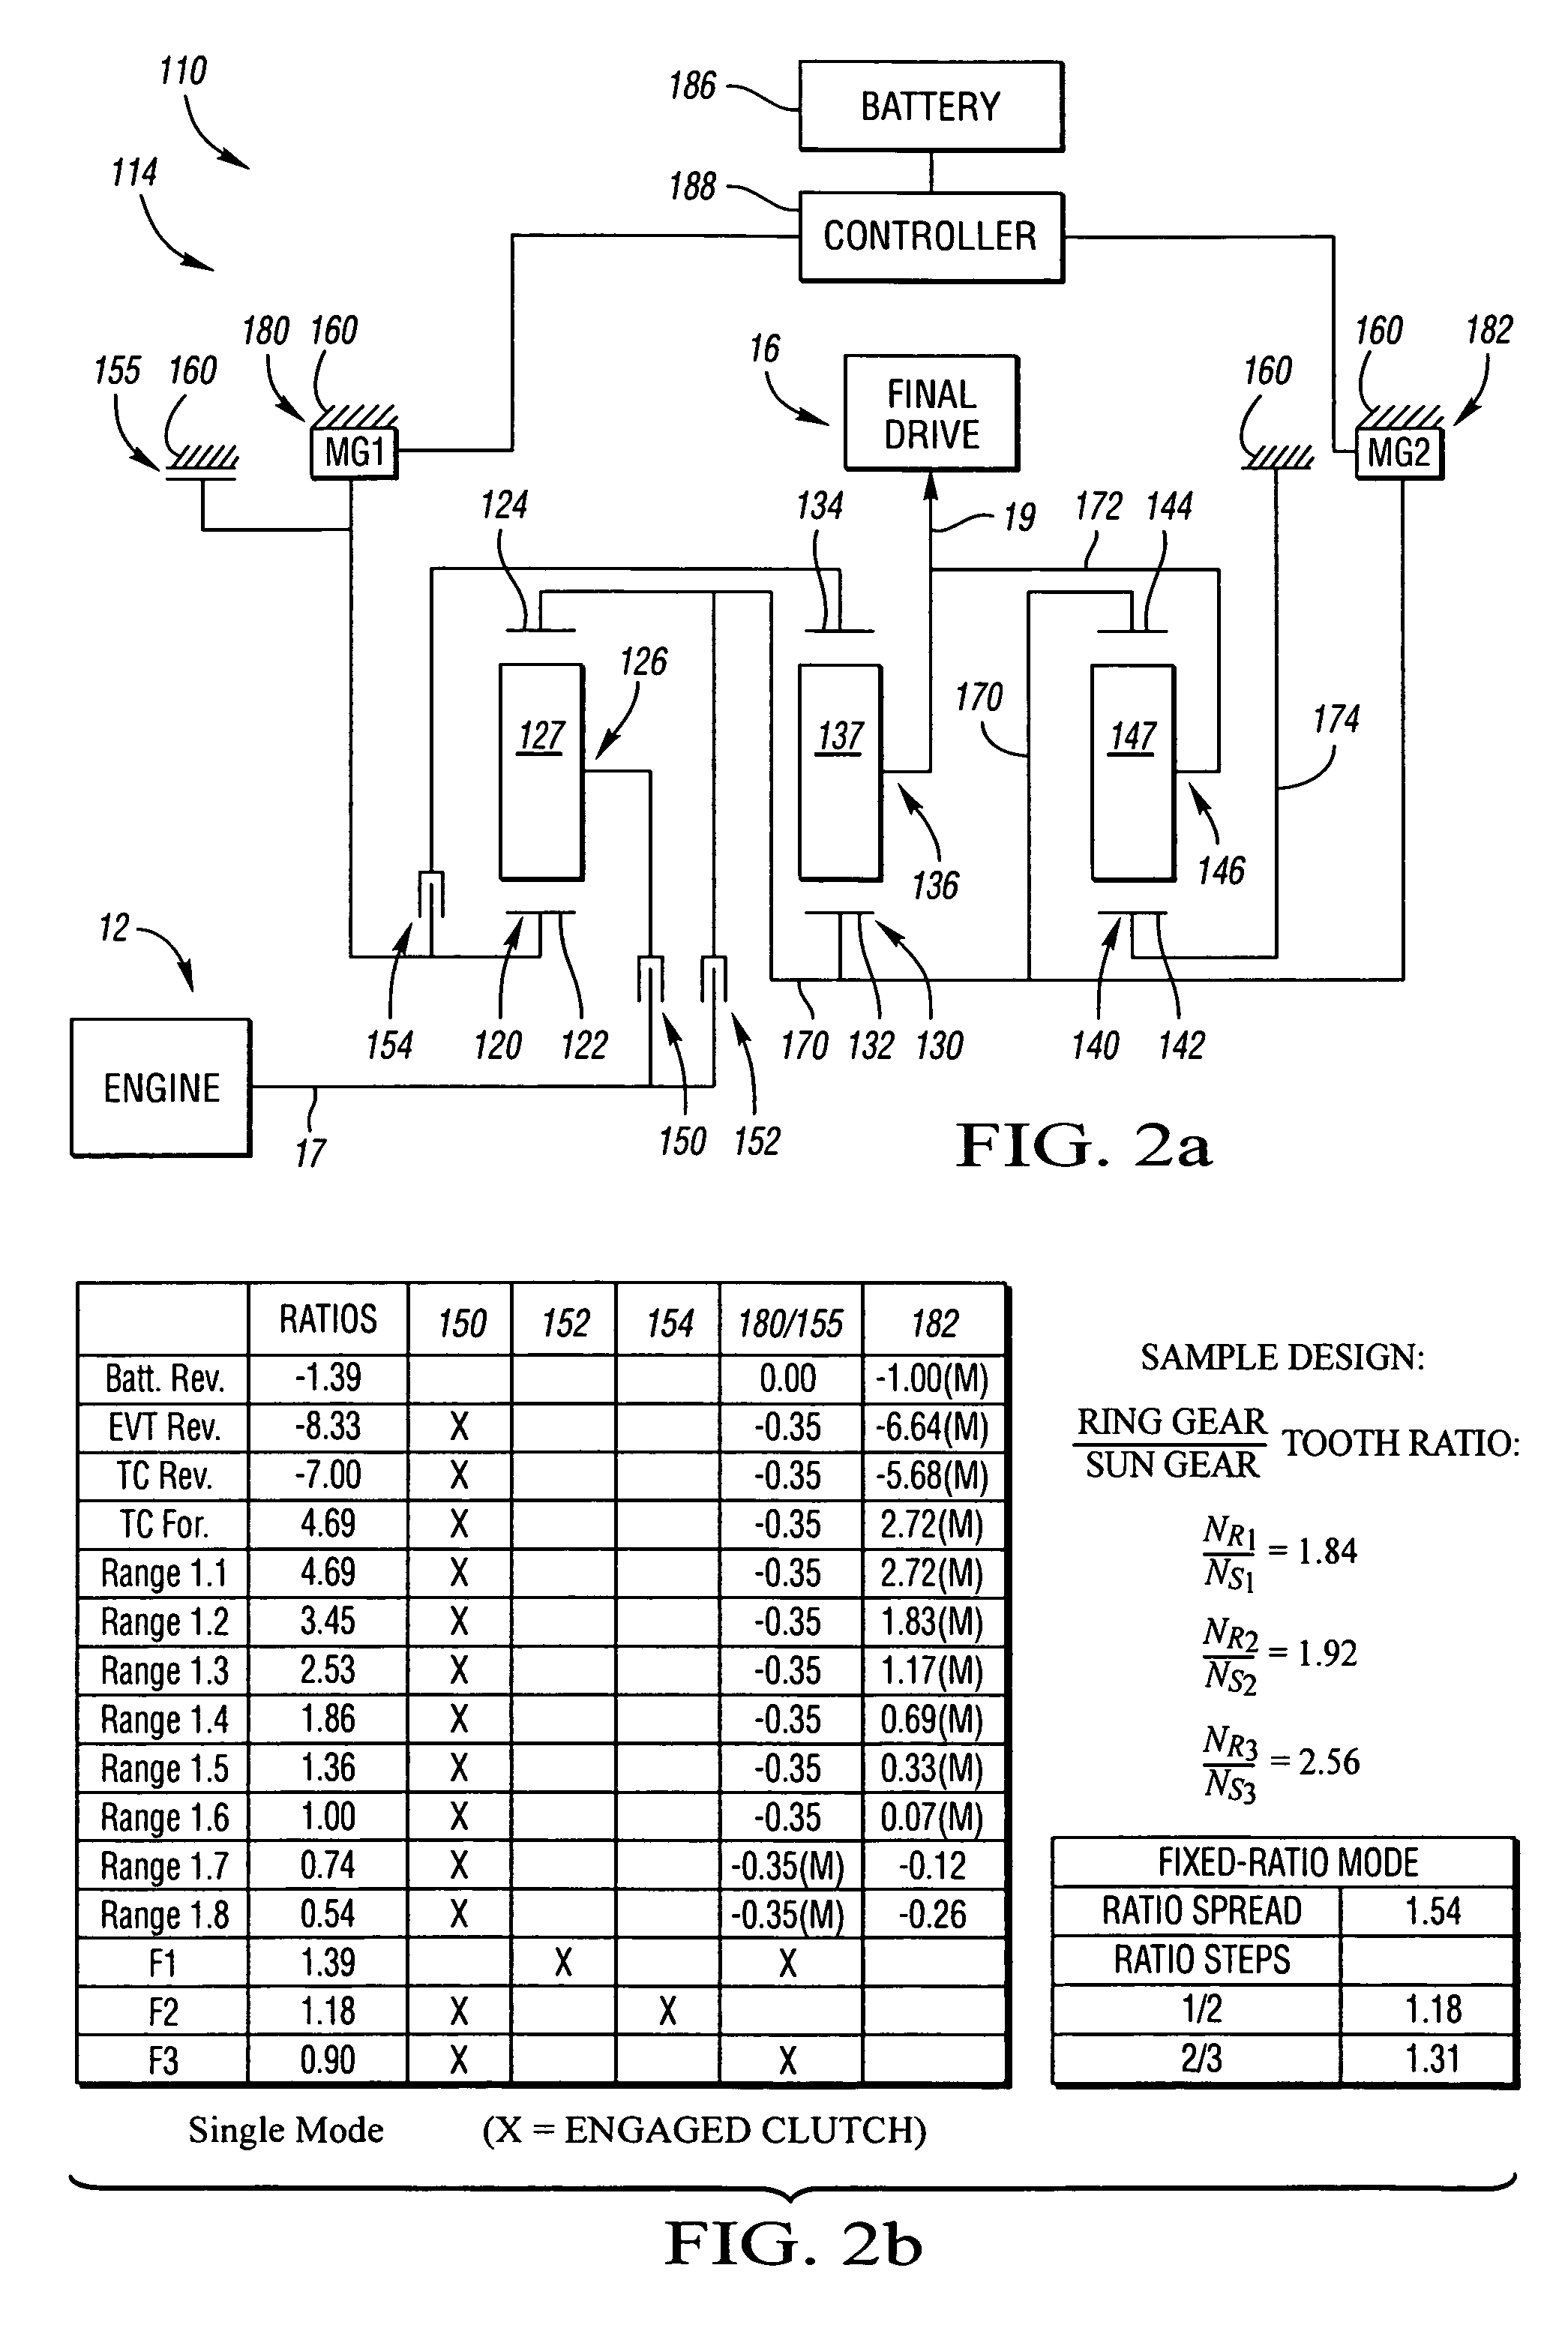 Electrically variable transmission having three planetary gear sets, clutched input, two fixed interconnections and a stationary member